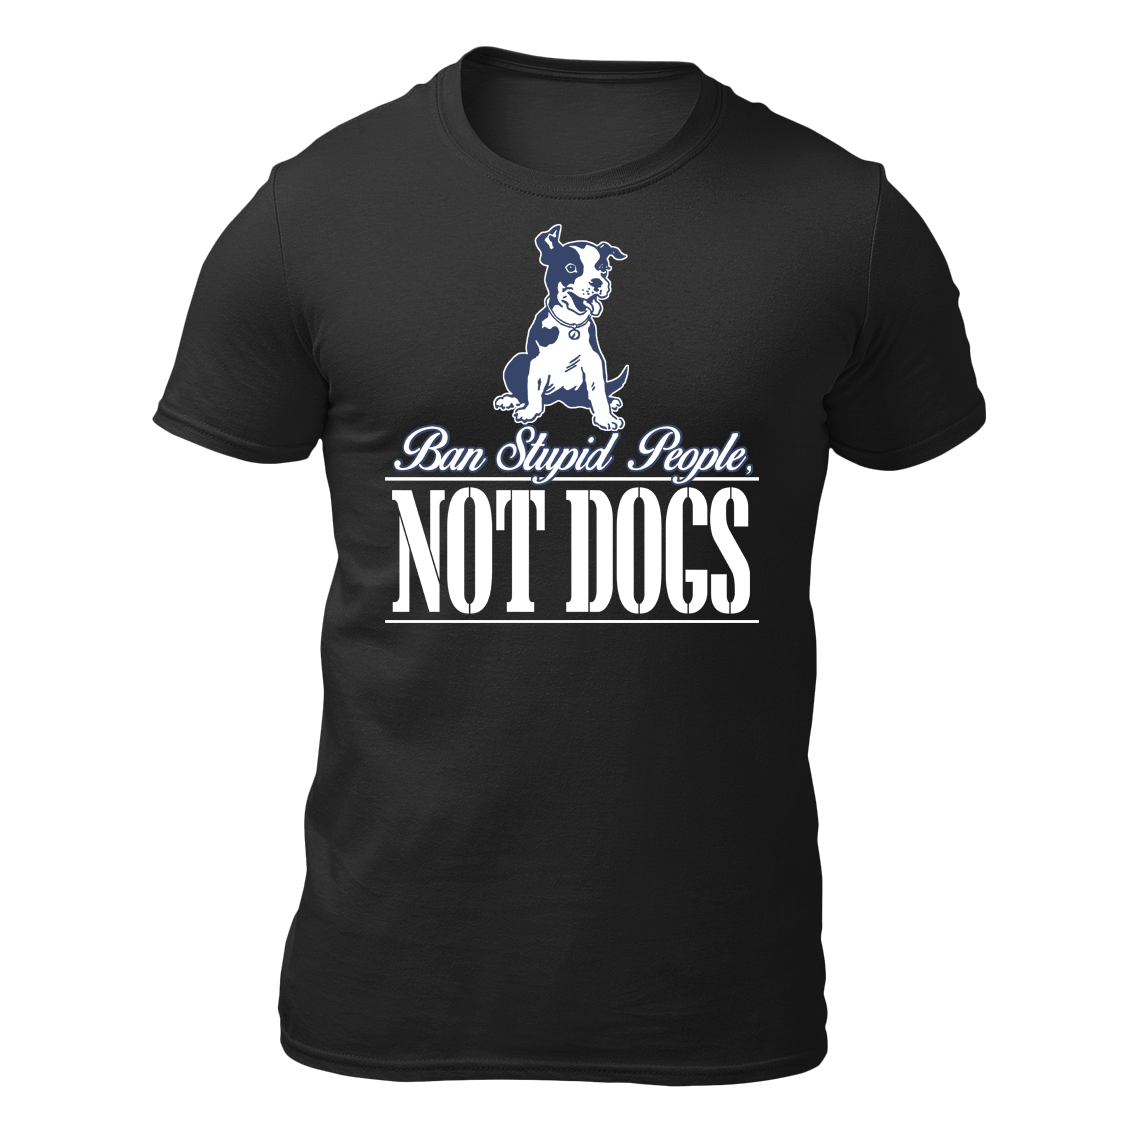 Ban Stupid People NOT Dogs Short Sleeve T-Shirt